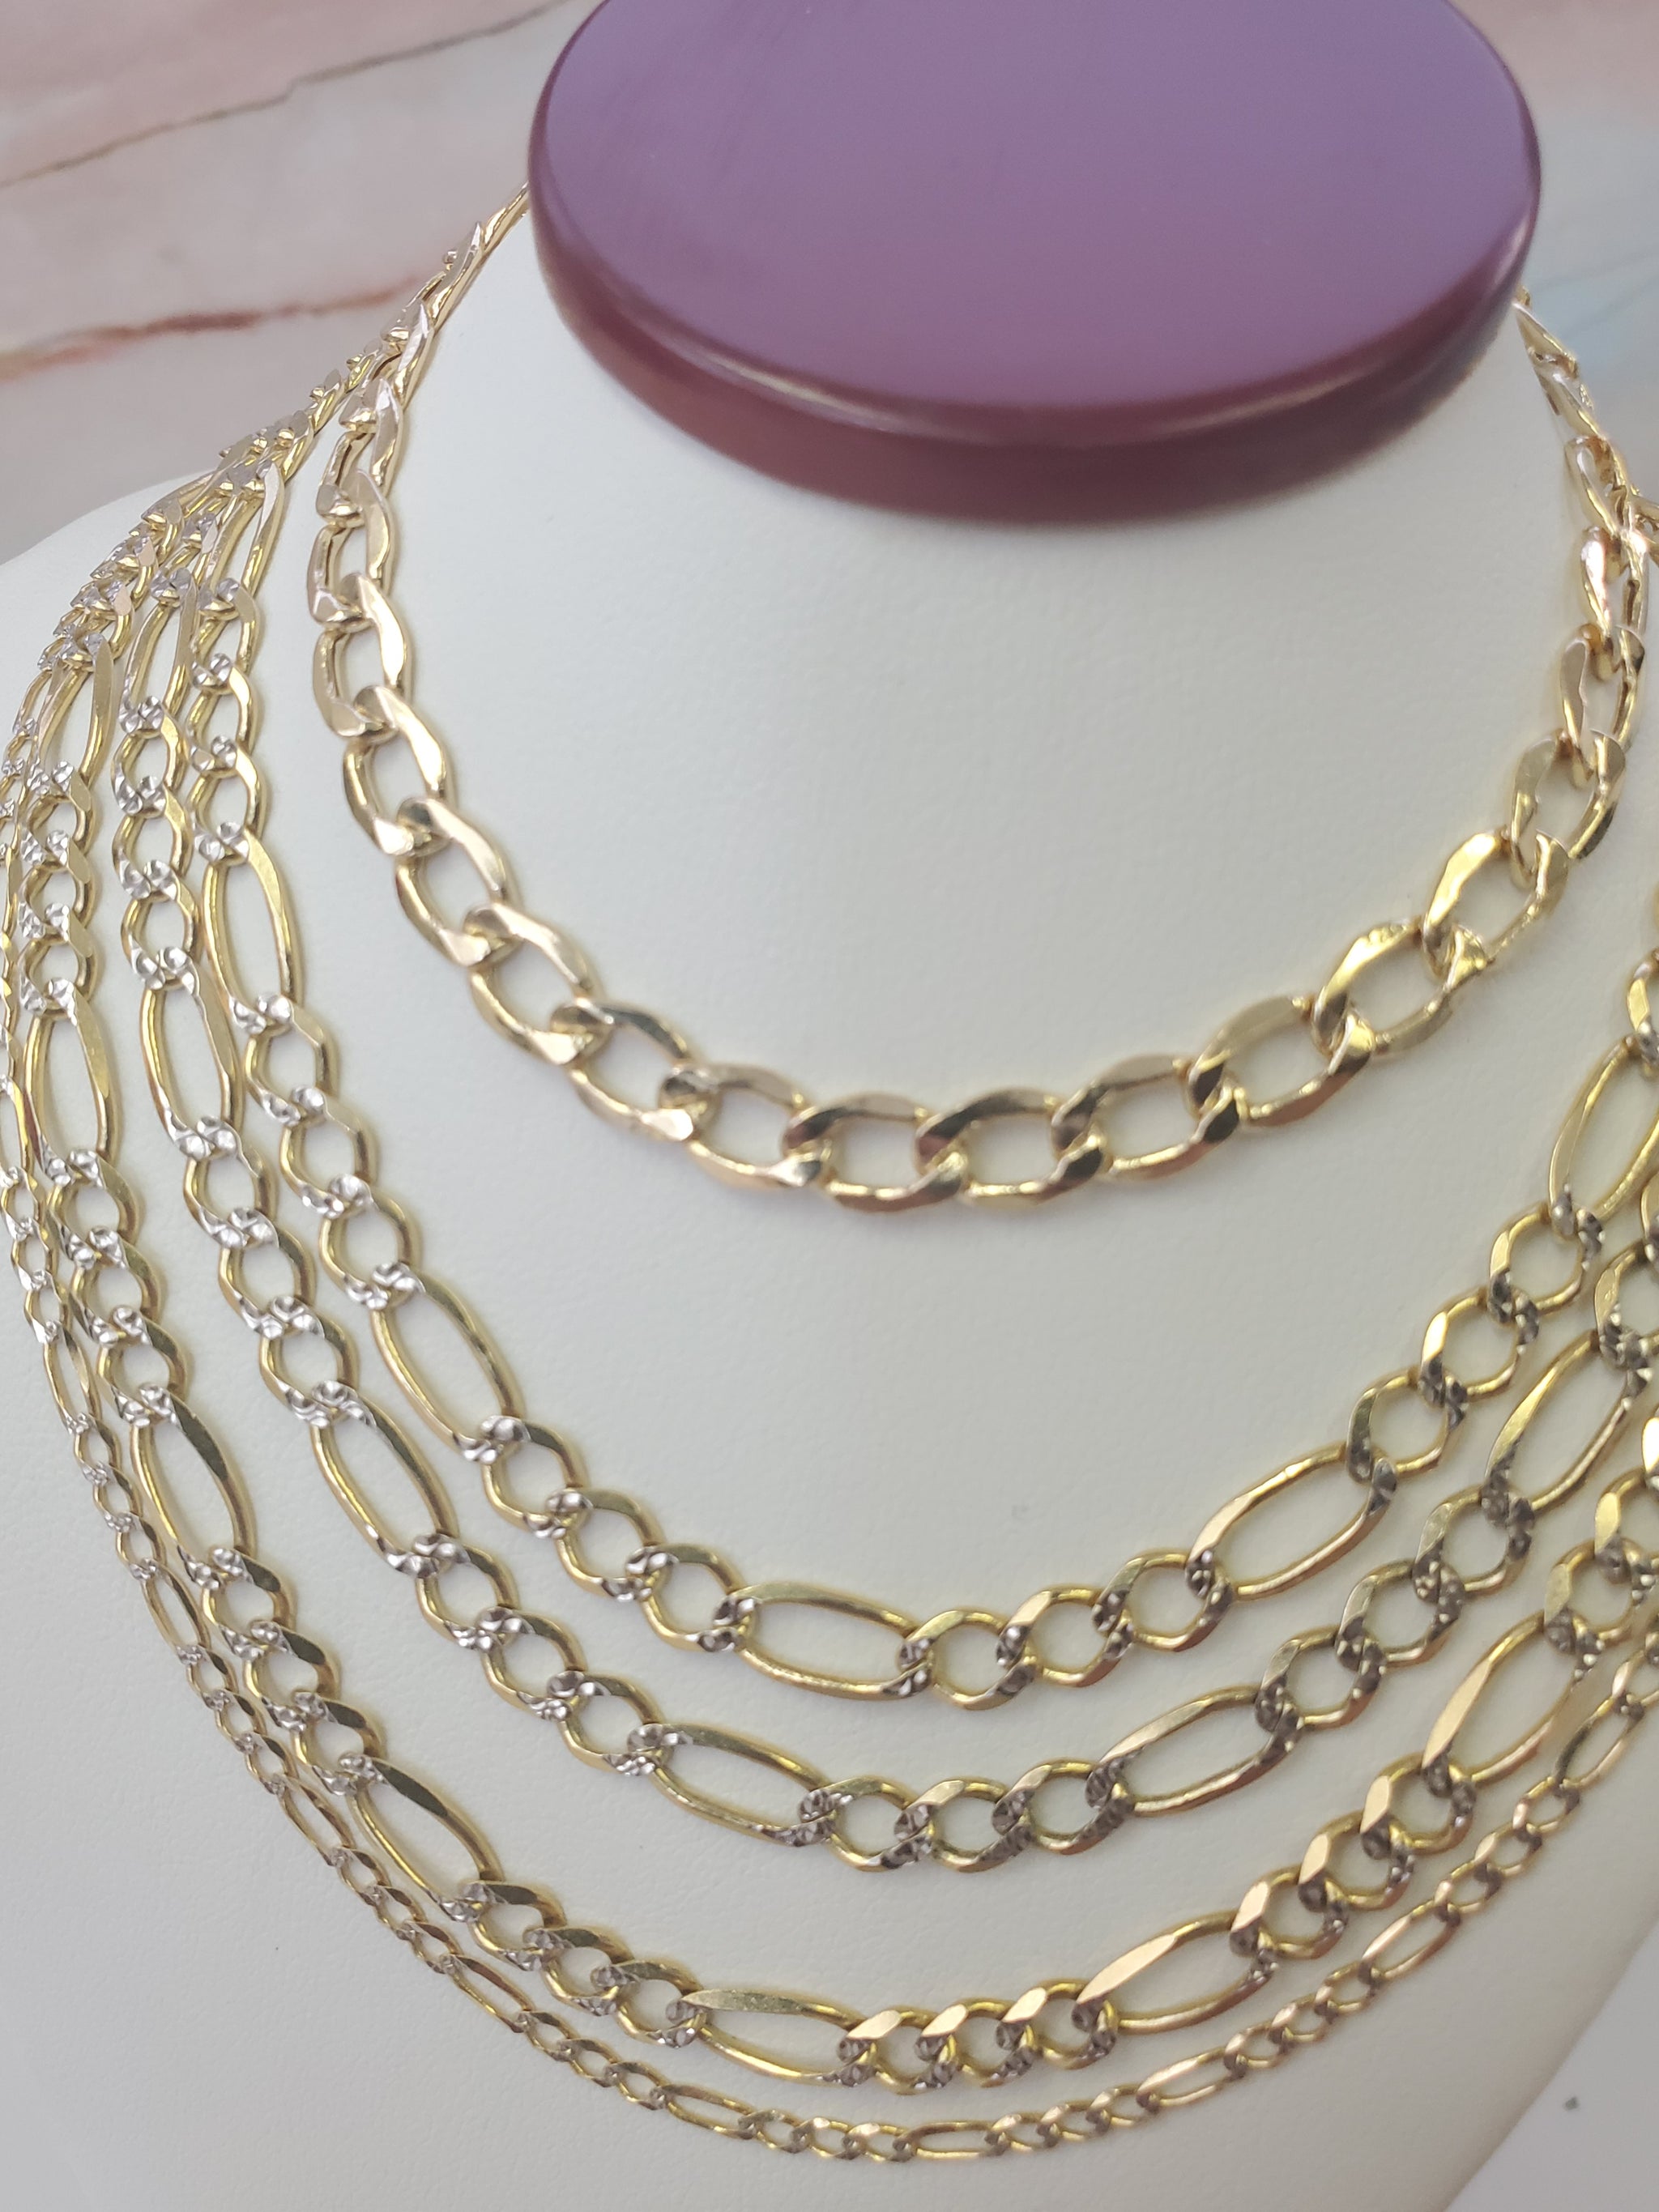 Real 10K Two Tone Yellow & White Gold Hollow Figaro Chain Necklace